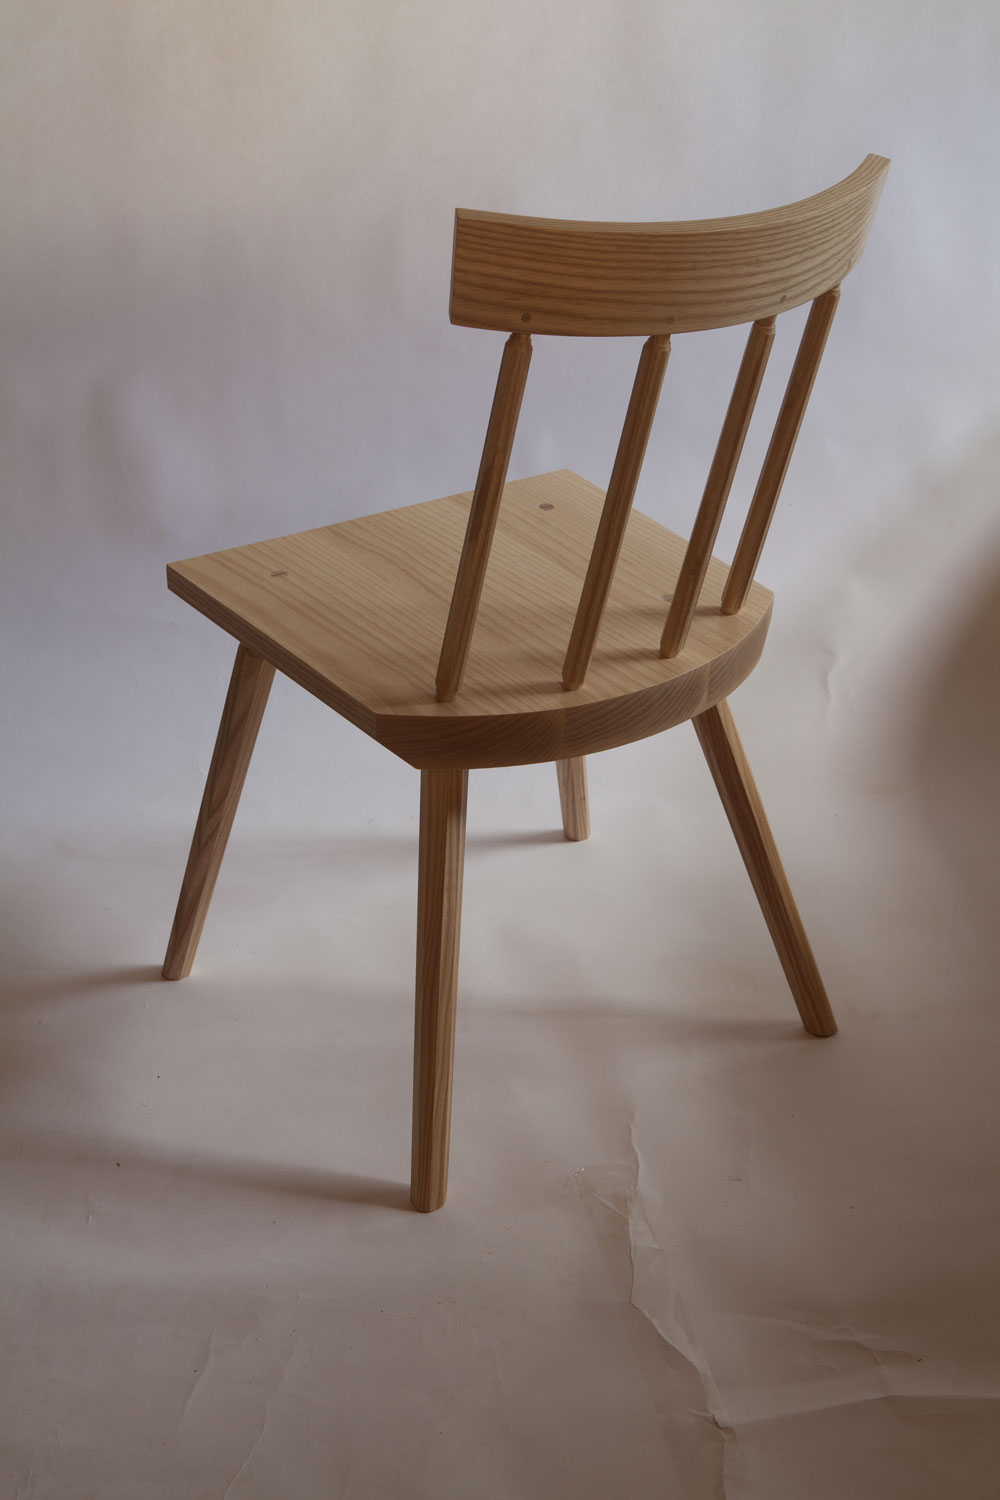 staked_chair_fin_IMG_1248